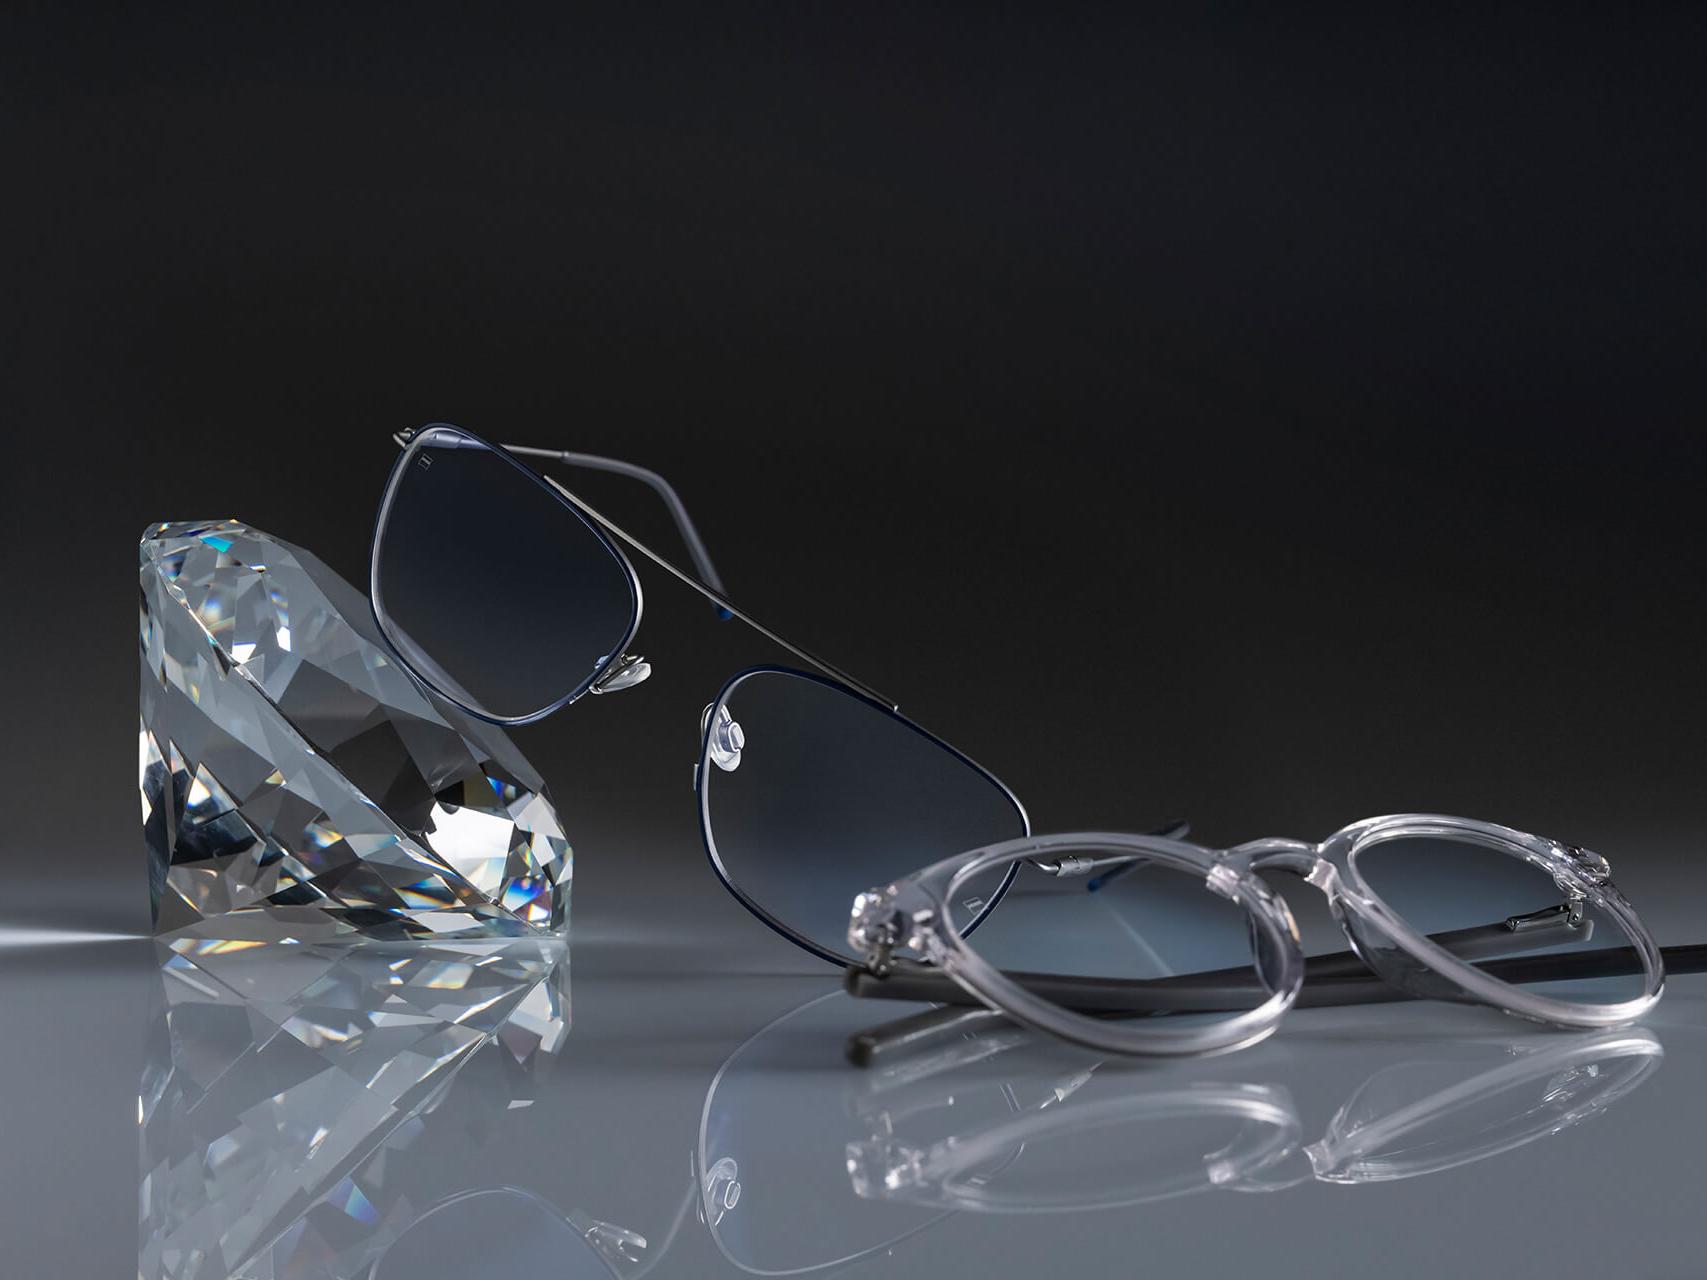 Two pairs of glasses with ZEISS lenses that have the hardest ZEISS coating ever - DuraVision® Platinum. One pair of glasses leans against a crystal, the other lies flat on the ground. Both feature clear lenses with no bluish reflection.